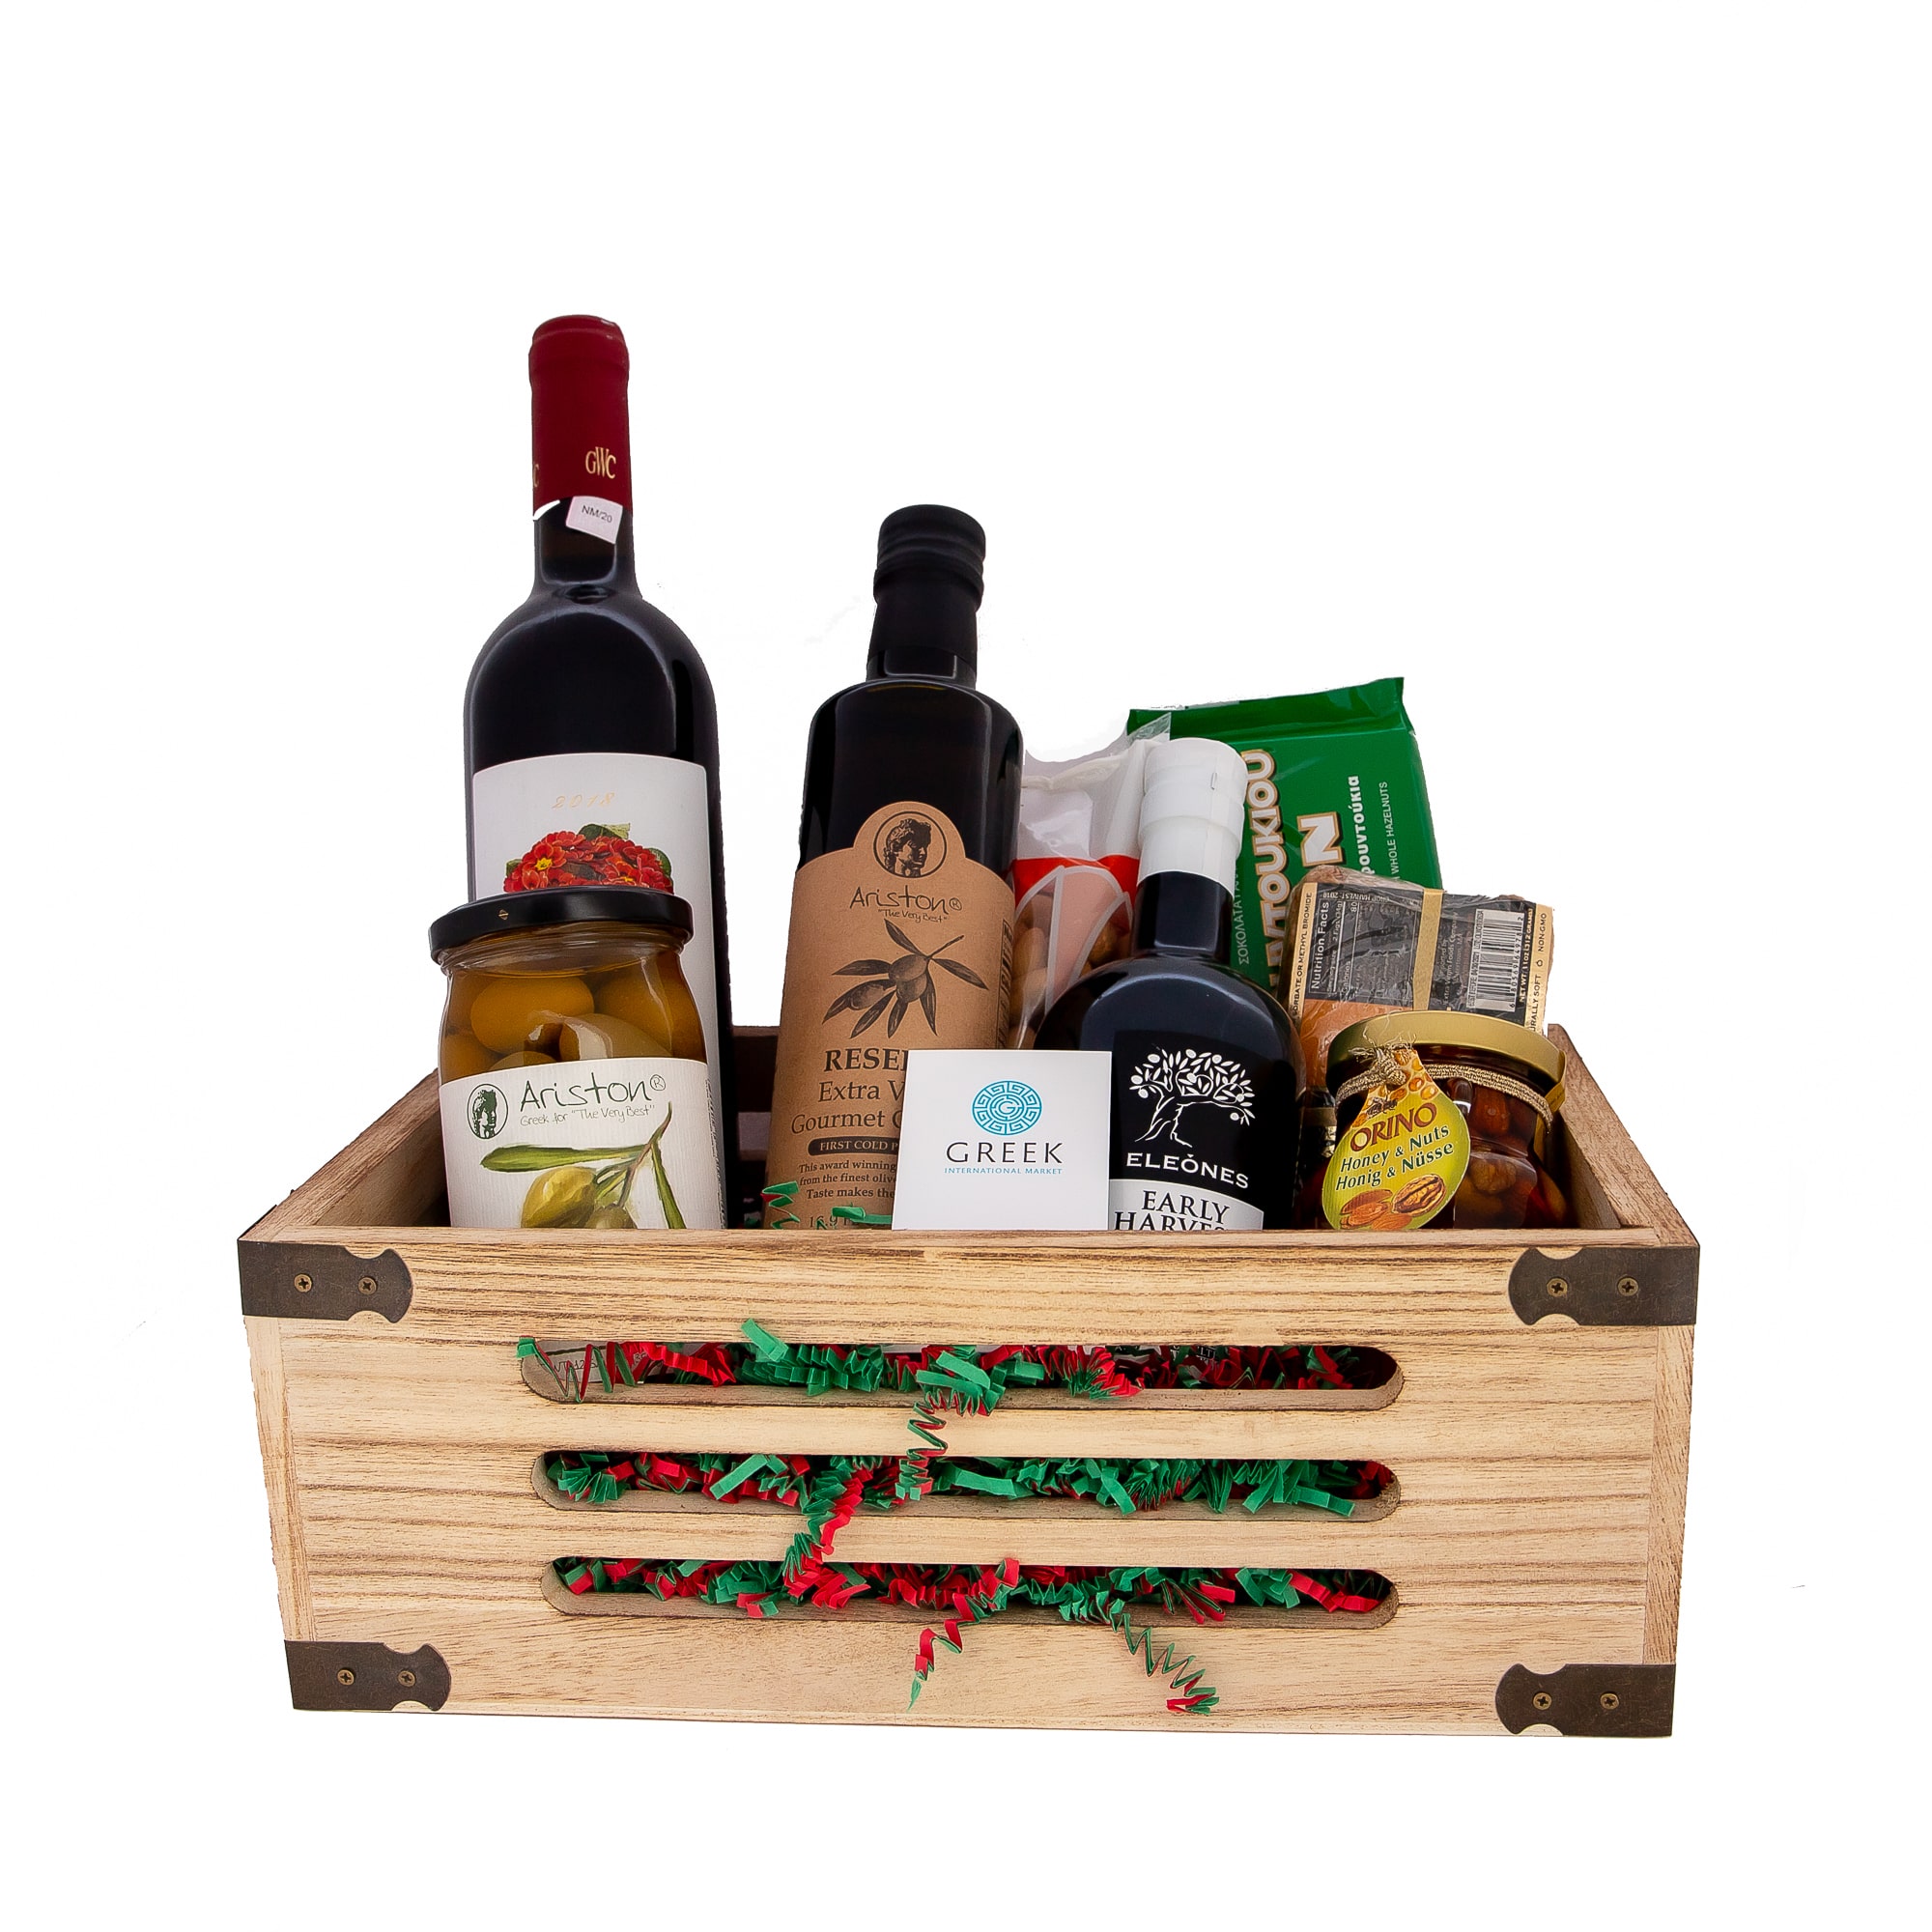 Custom wooden baskets with variety of food and dressings